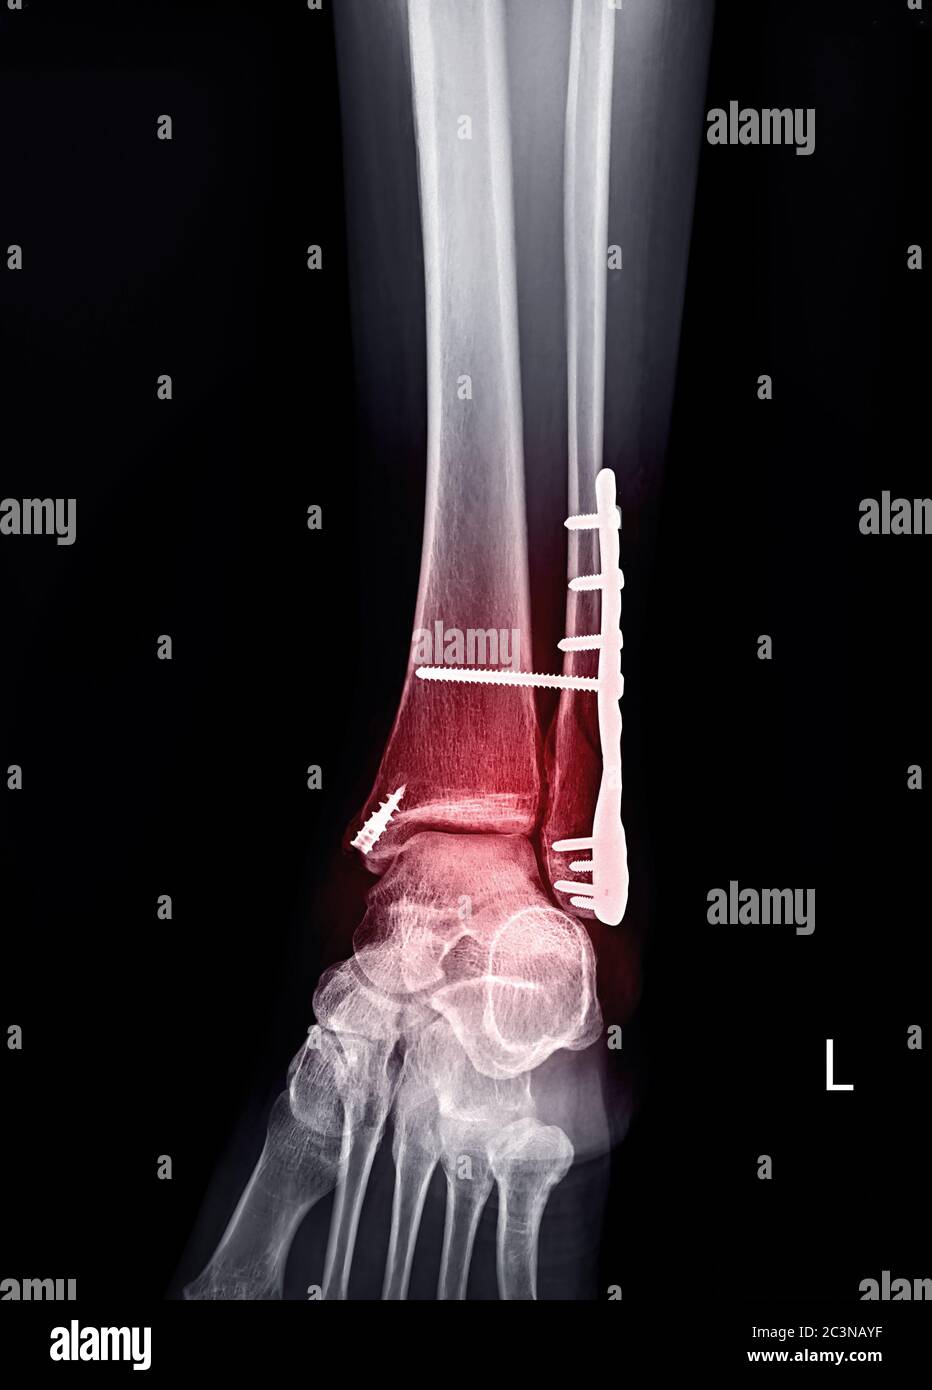 X-ray ankle or Radiographic image or x-ray image of left ankle joint  AP view  showing ankle plate and screws surgery with fracture fibula bone. Stock Photo